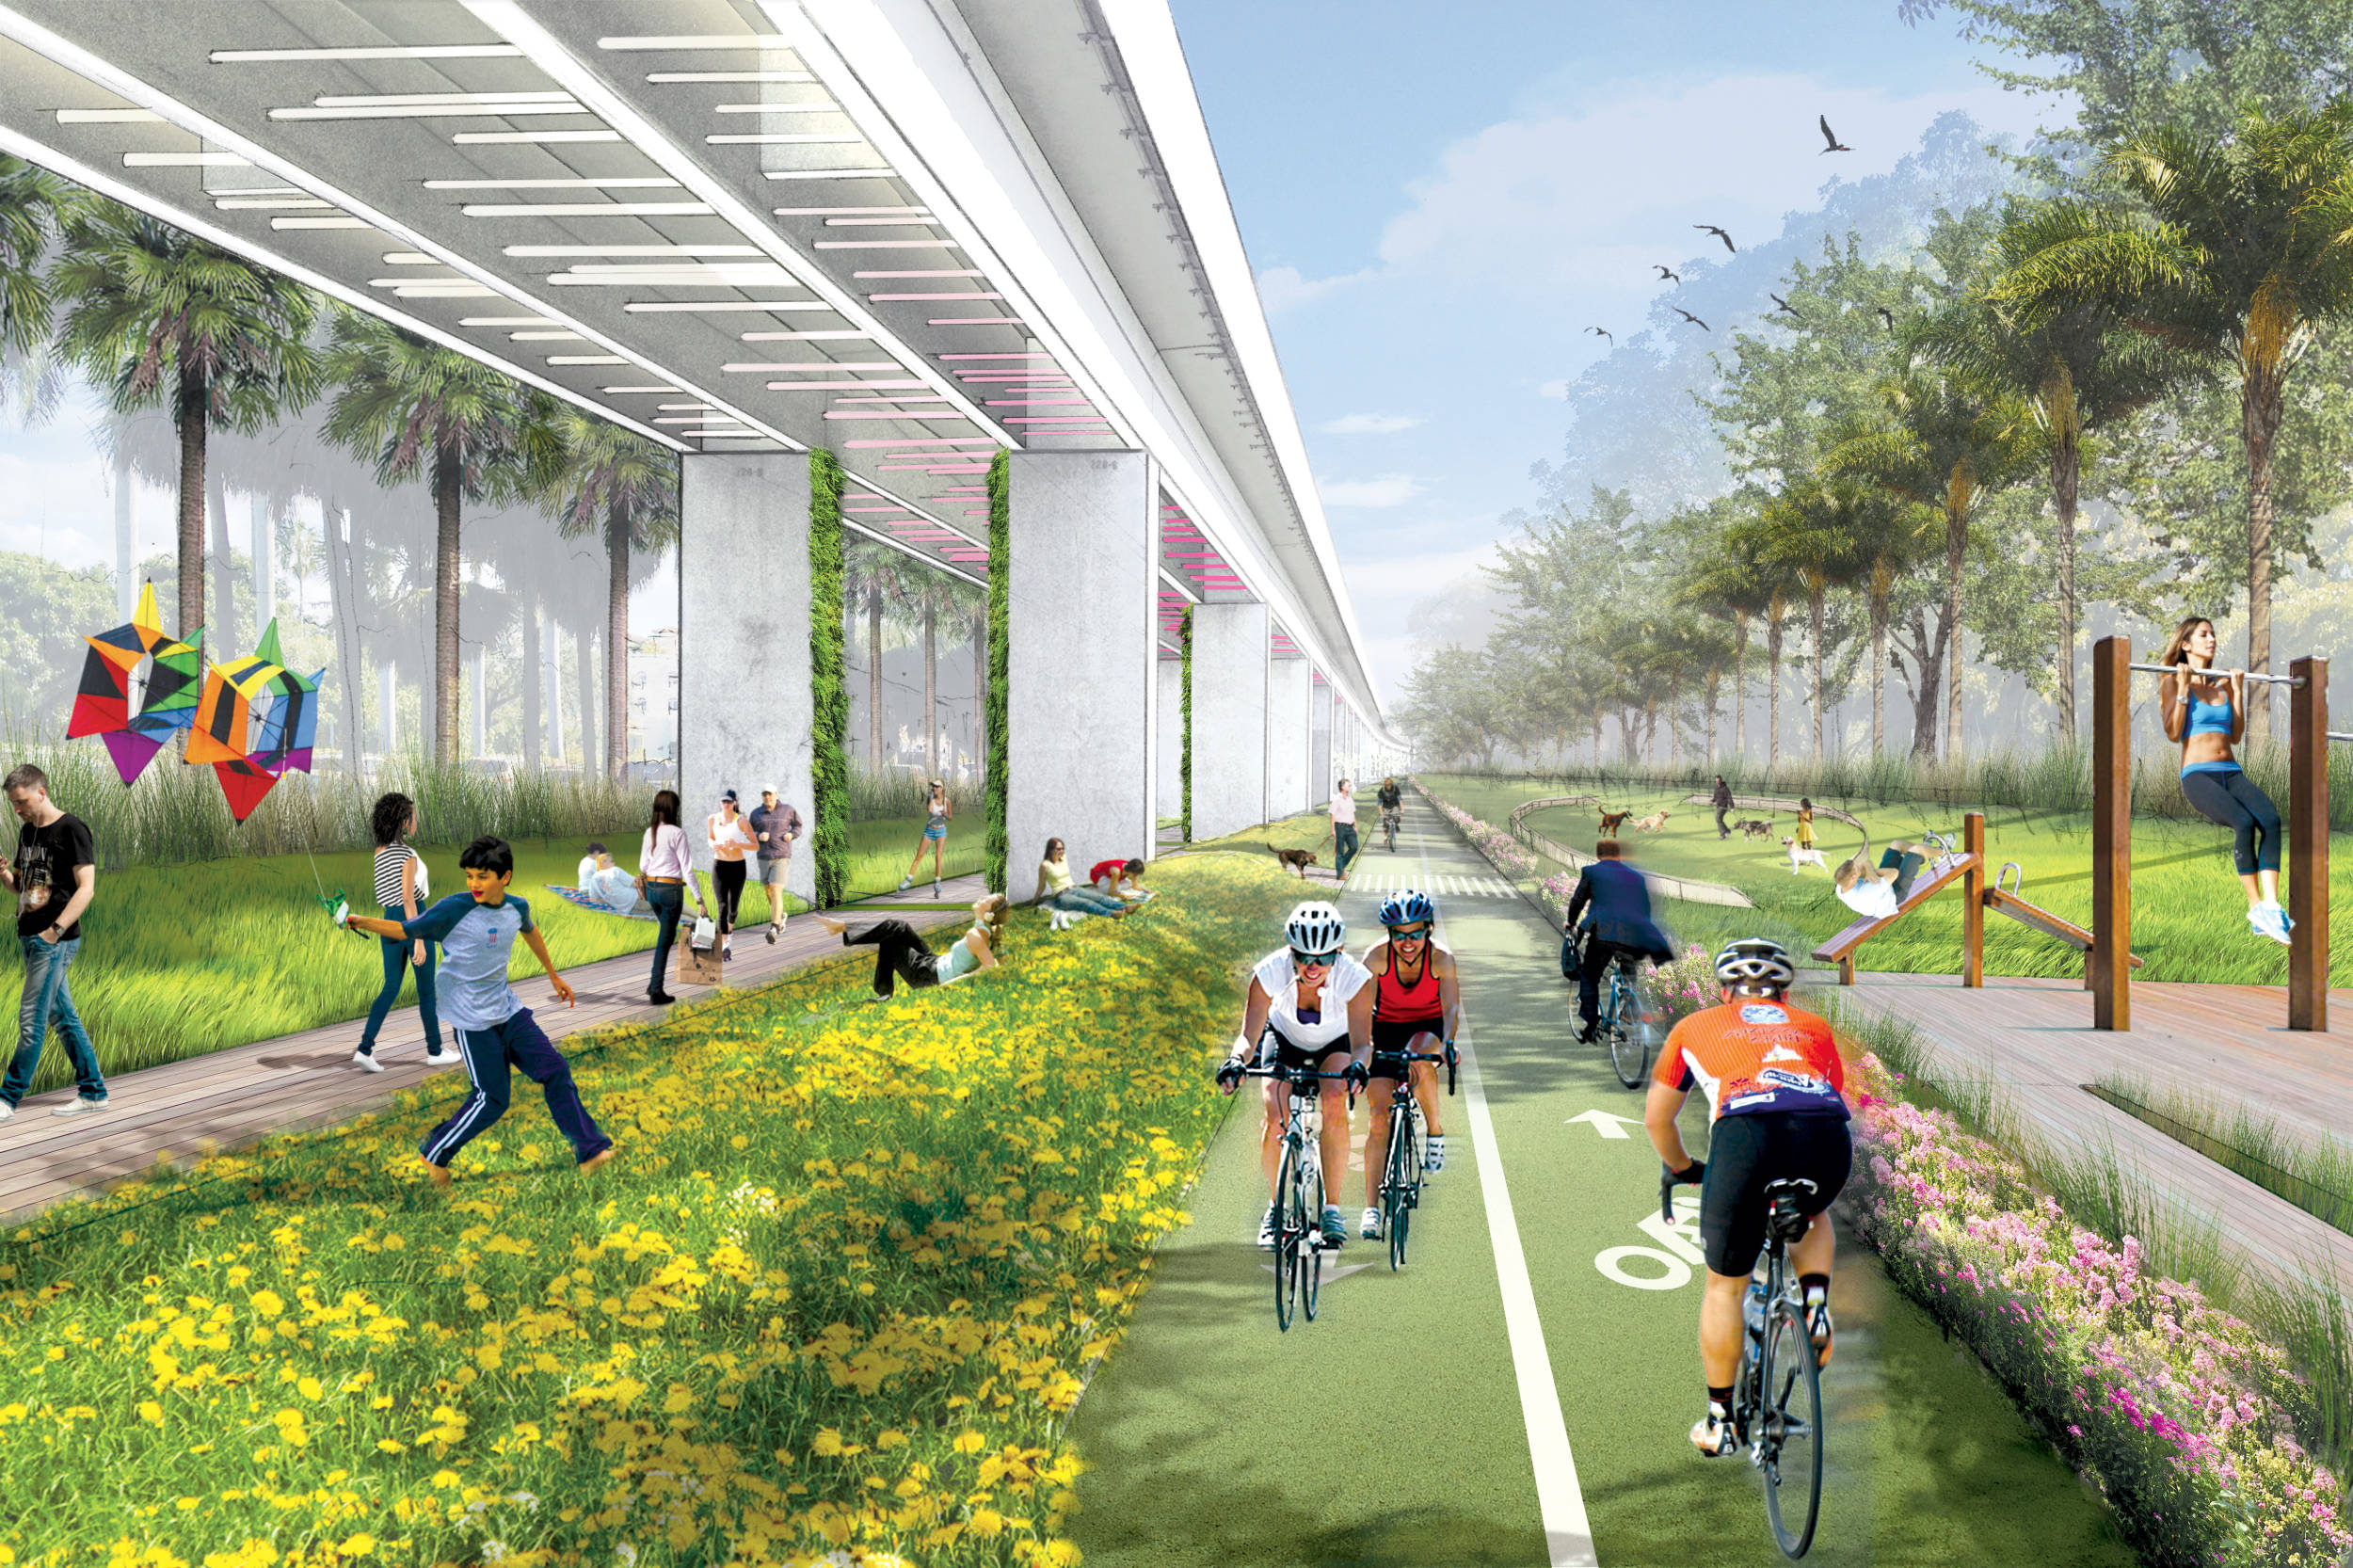 Miami's 10-mile linear park and urban trail — The Underline